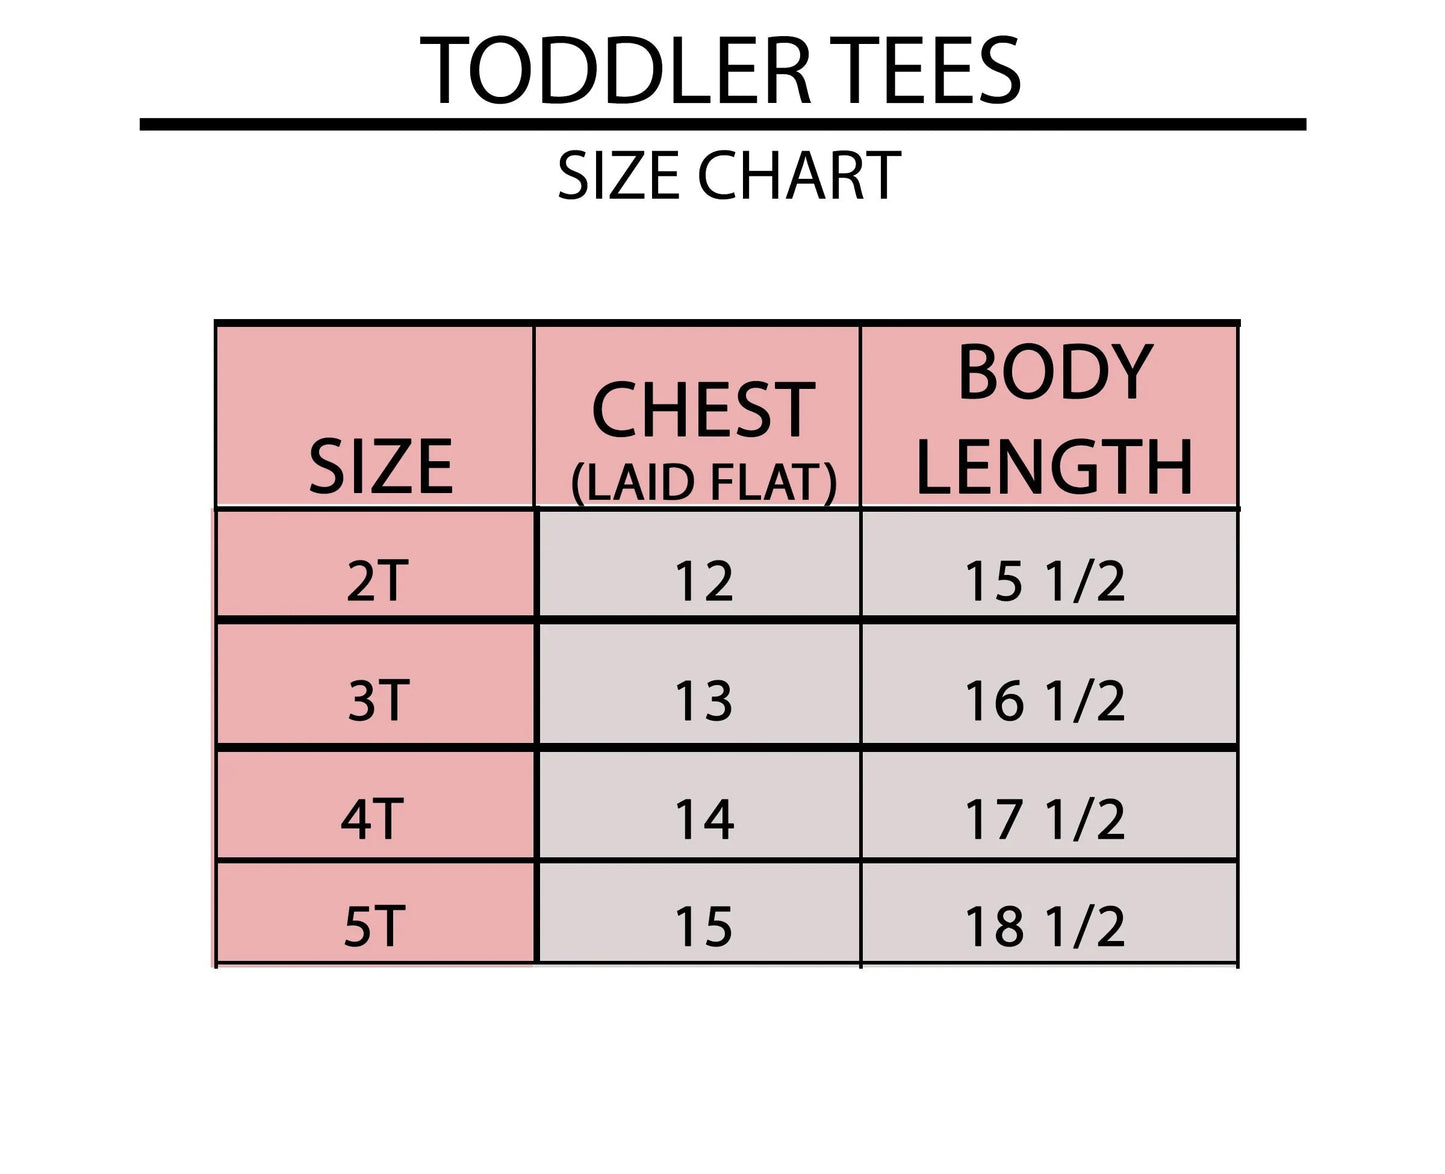 Red White And Blue Cousin's Crew | Toddler Short Sleeve Crew Neck